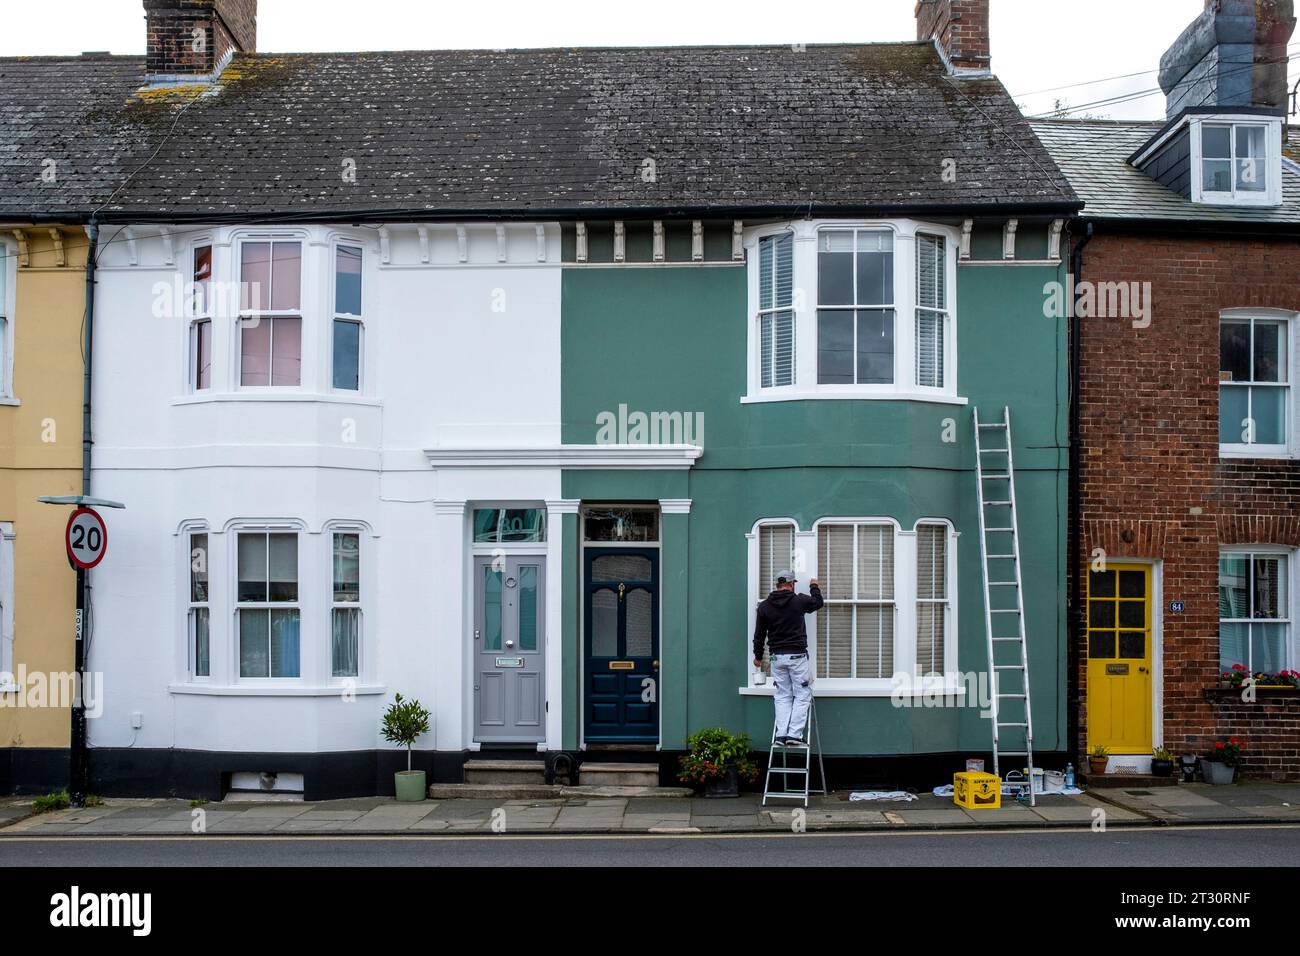 A Painter and Decorator Working In The Town of Lewes, East Sussex, UK. Stock Photo